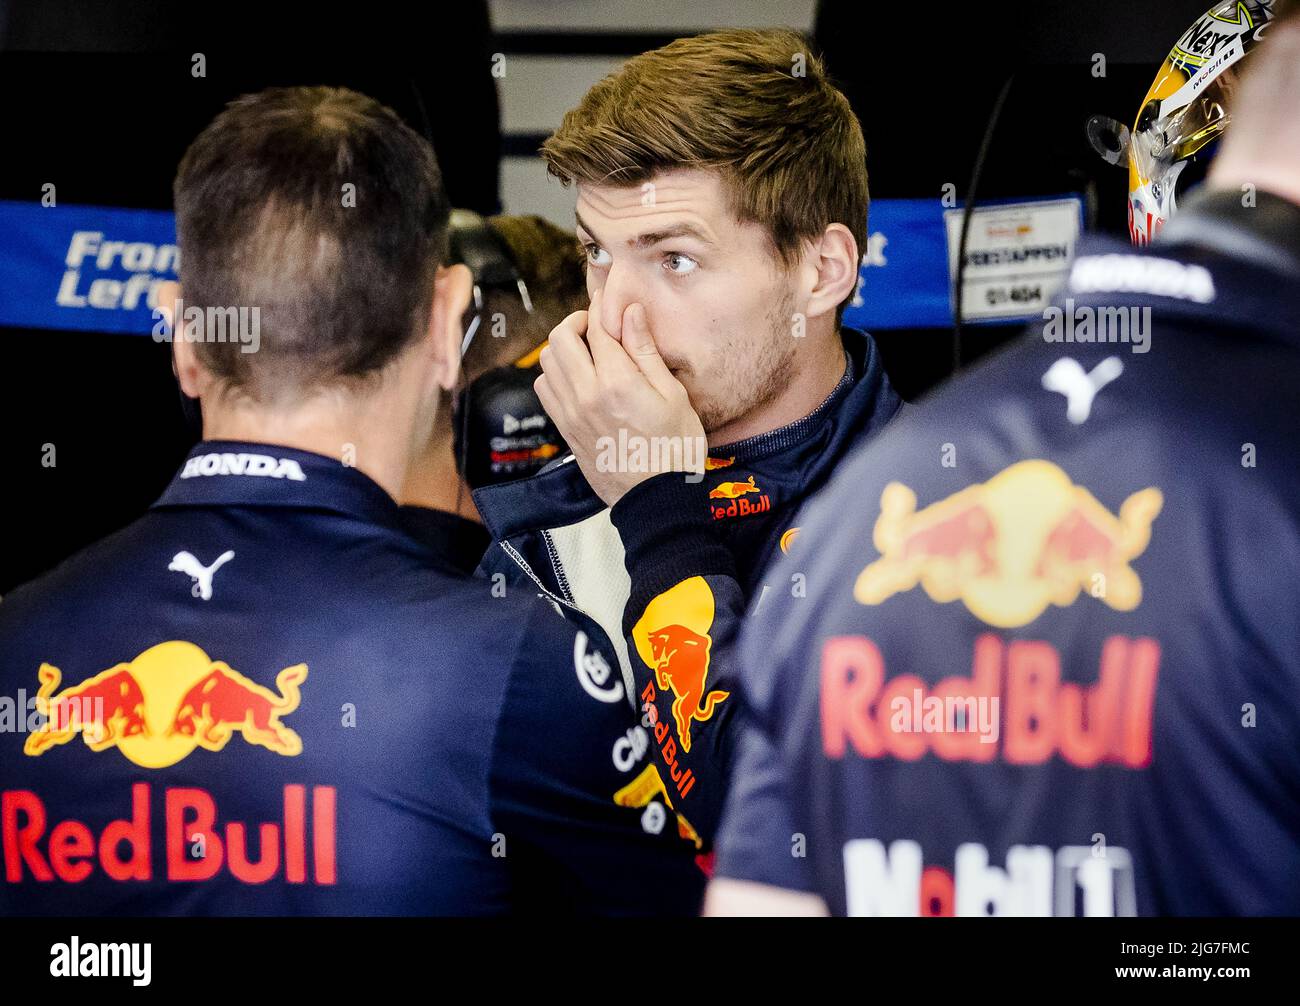 SPIELBERG - Max Verstappen (Red Bull) in the pit box prior to the 1st practice session ahead of the F1 Grand Prix of Austria at the Red Bull Ring on July 8, 2022 in Spielberg, Austria. ANP SEM VAN DER WAL Credit: ANP/Alamy Live News Stock Photo